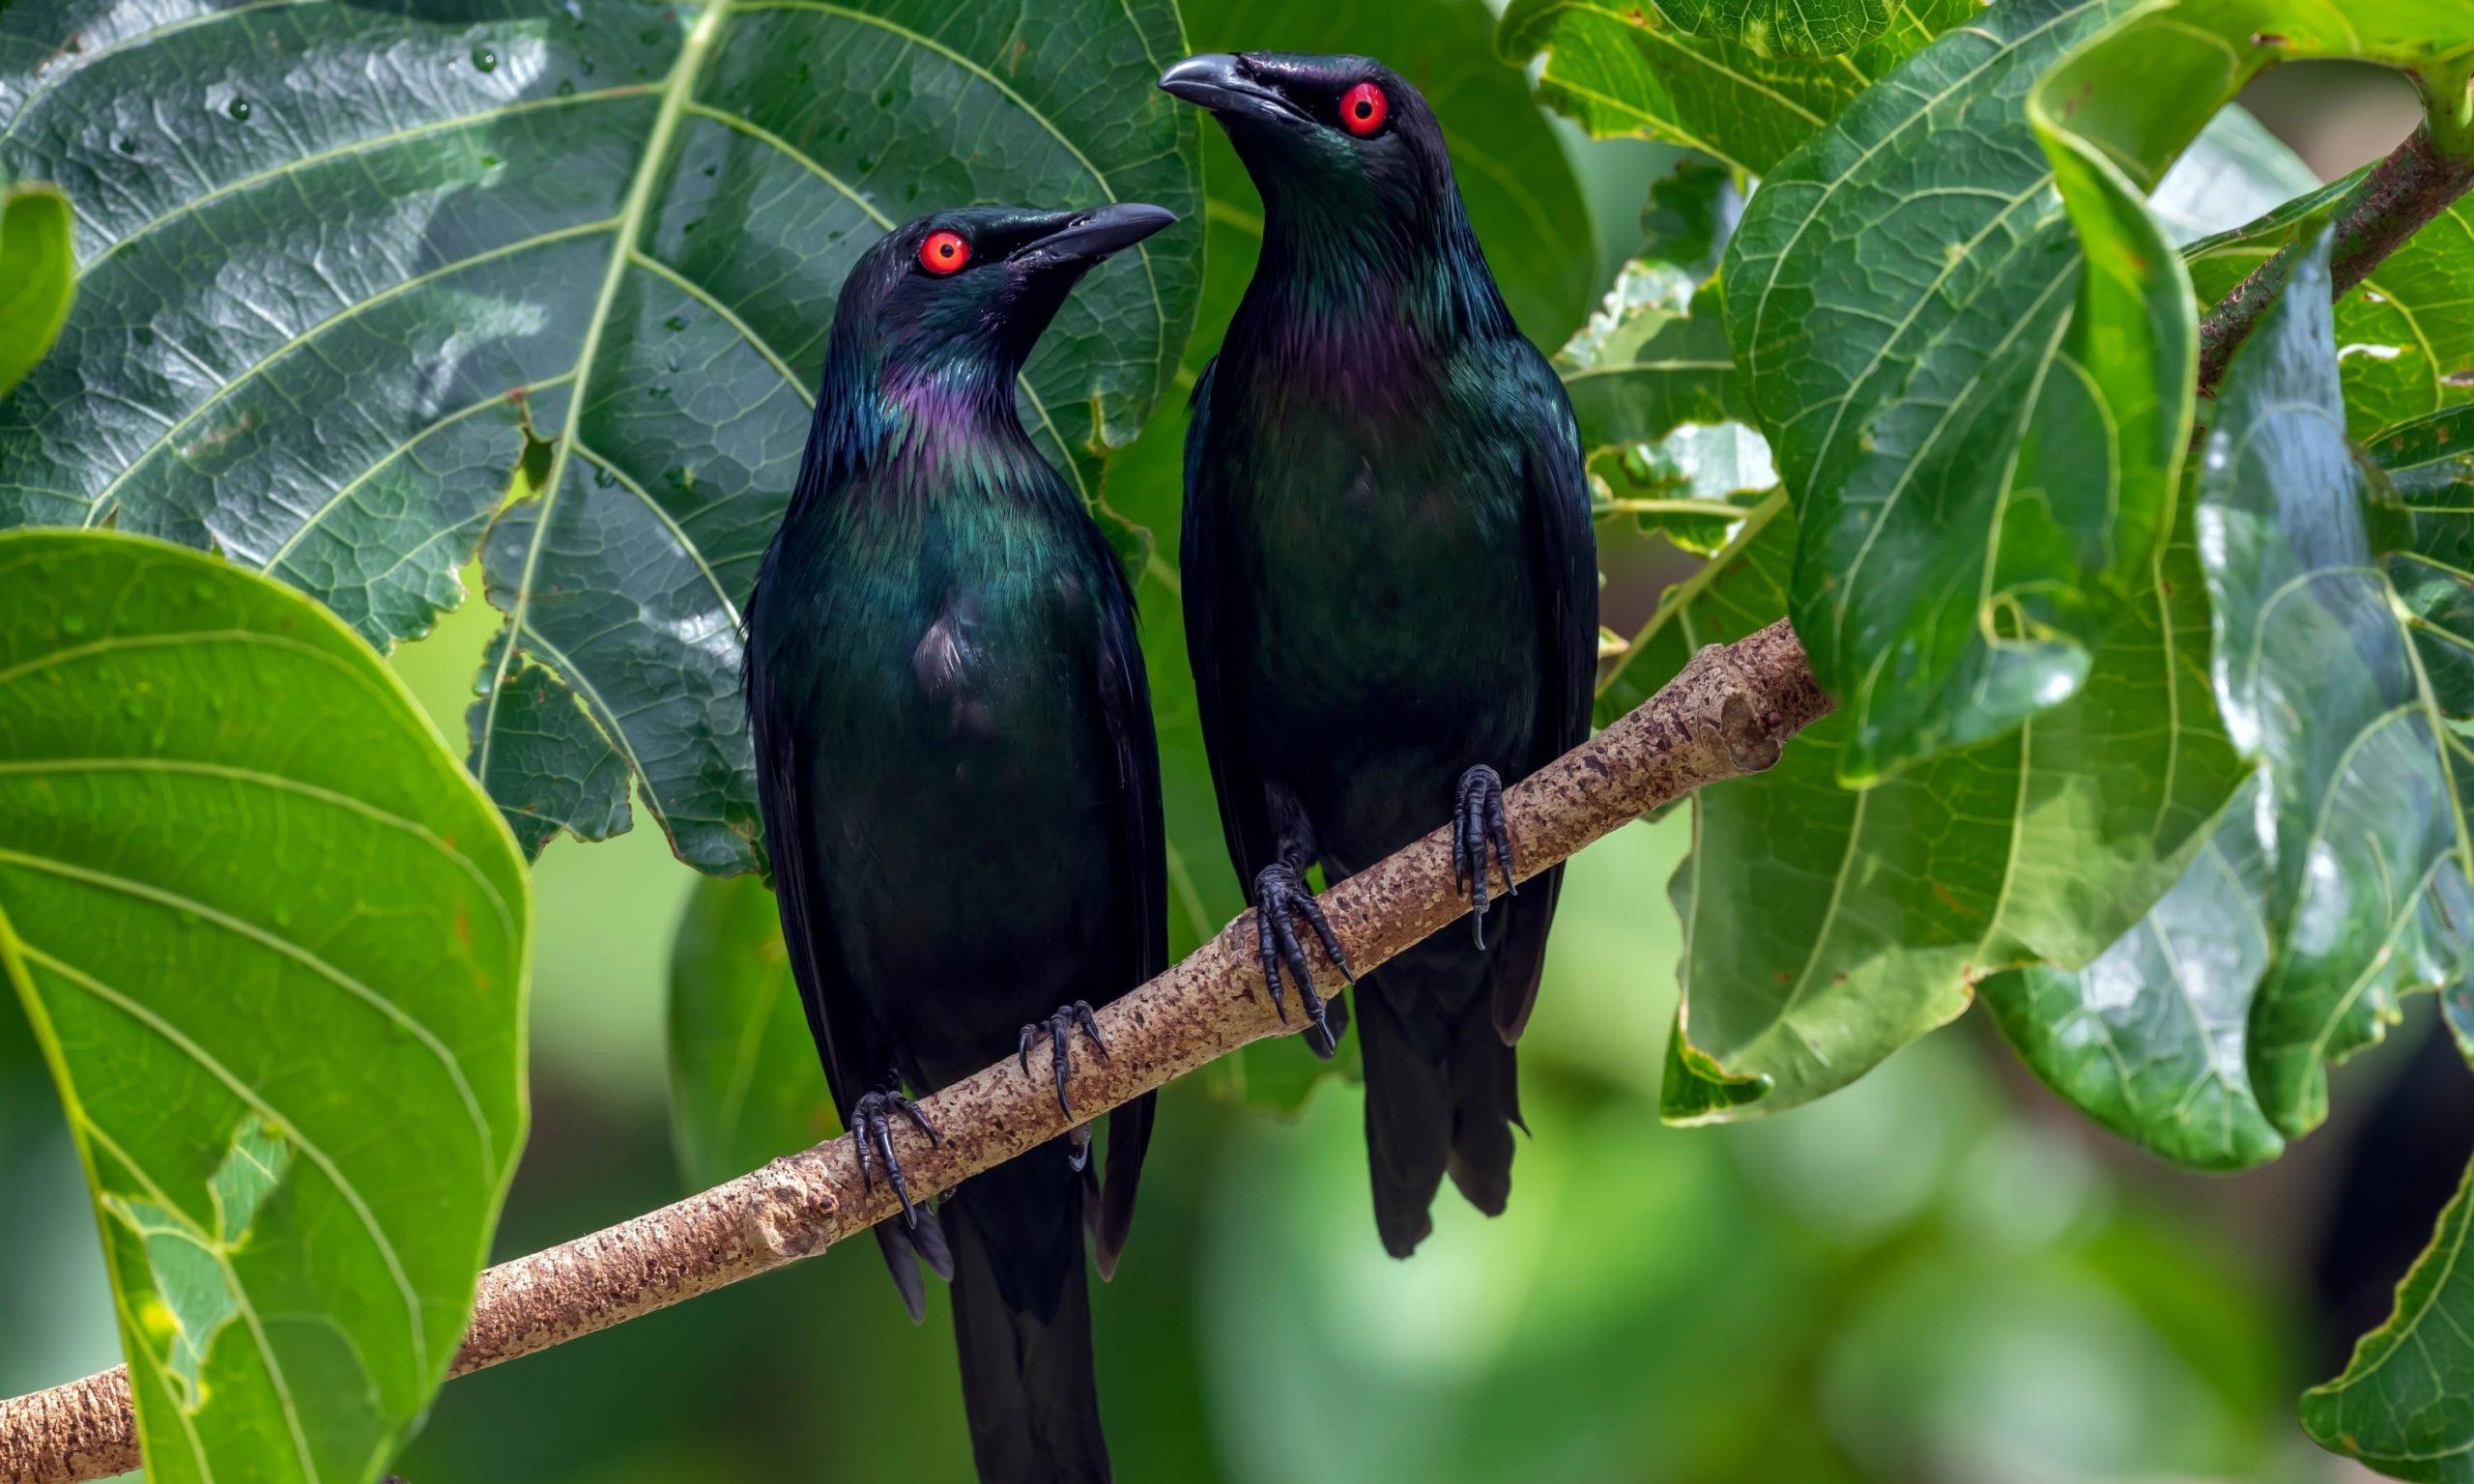 Native Birds of the Daintree | Daintree Rainforest Discovery Centre